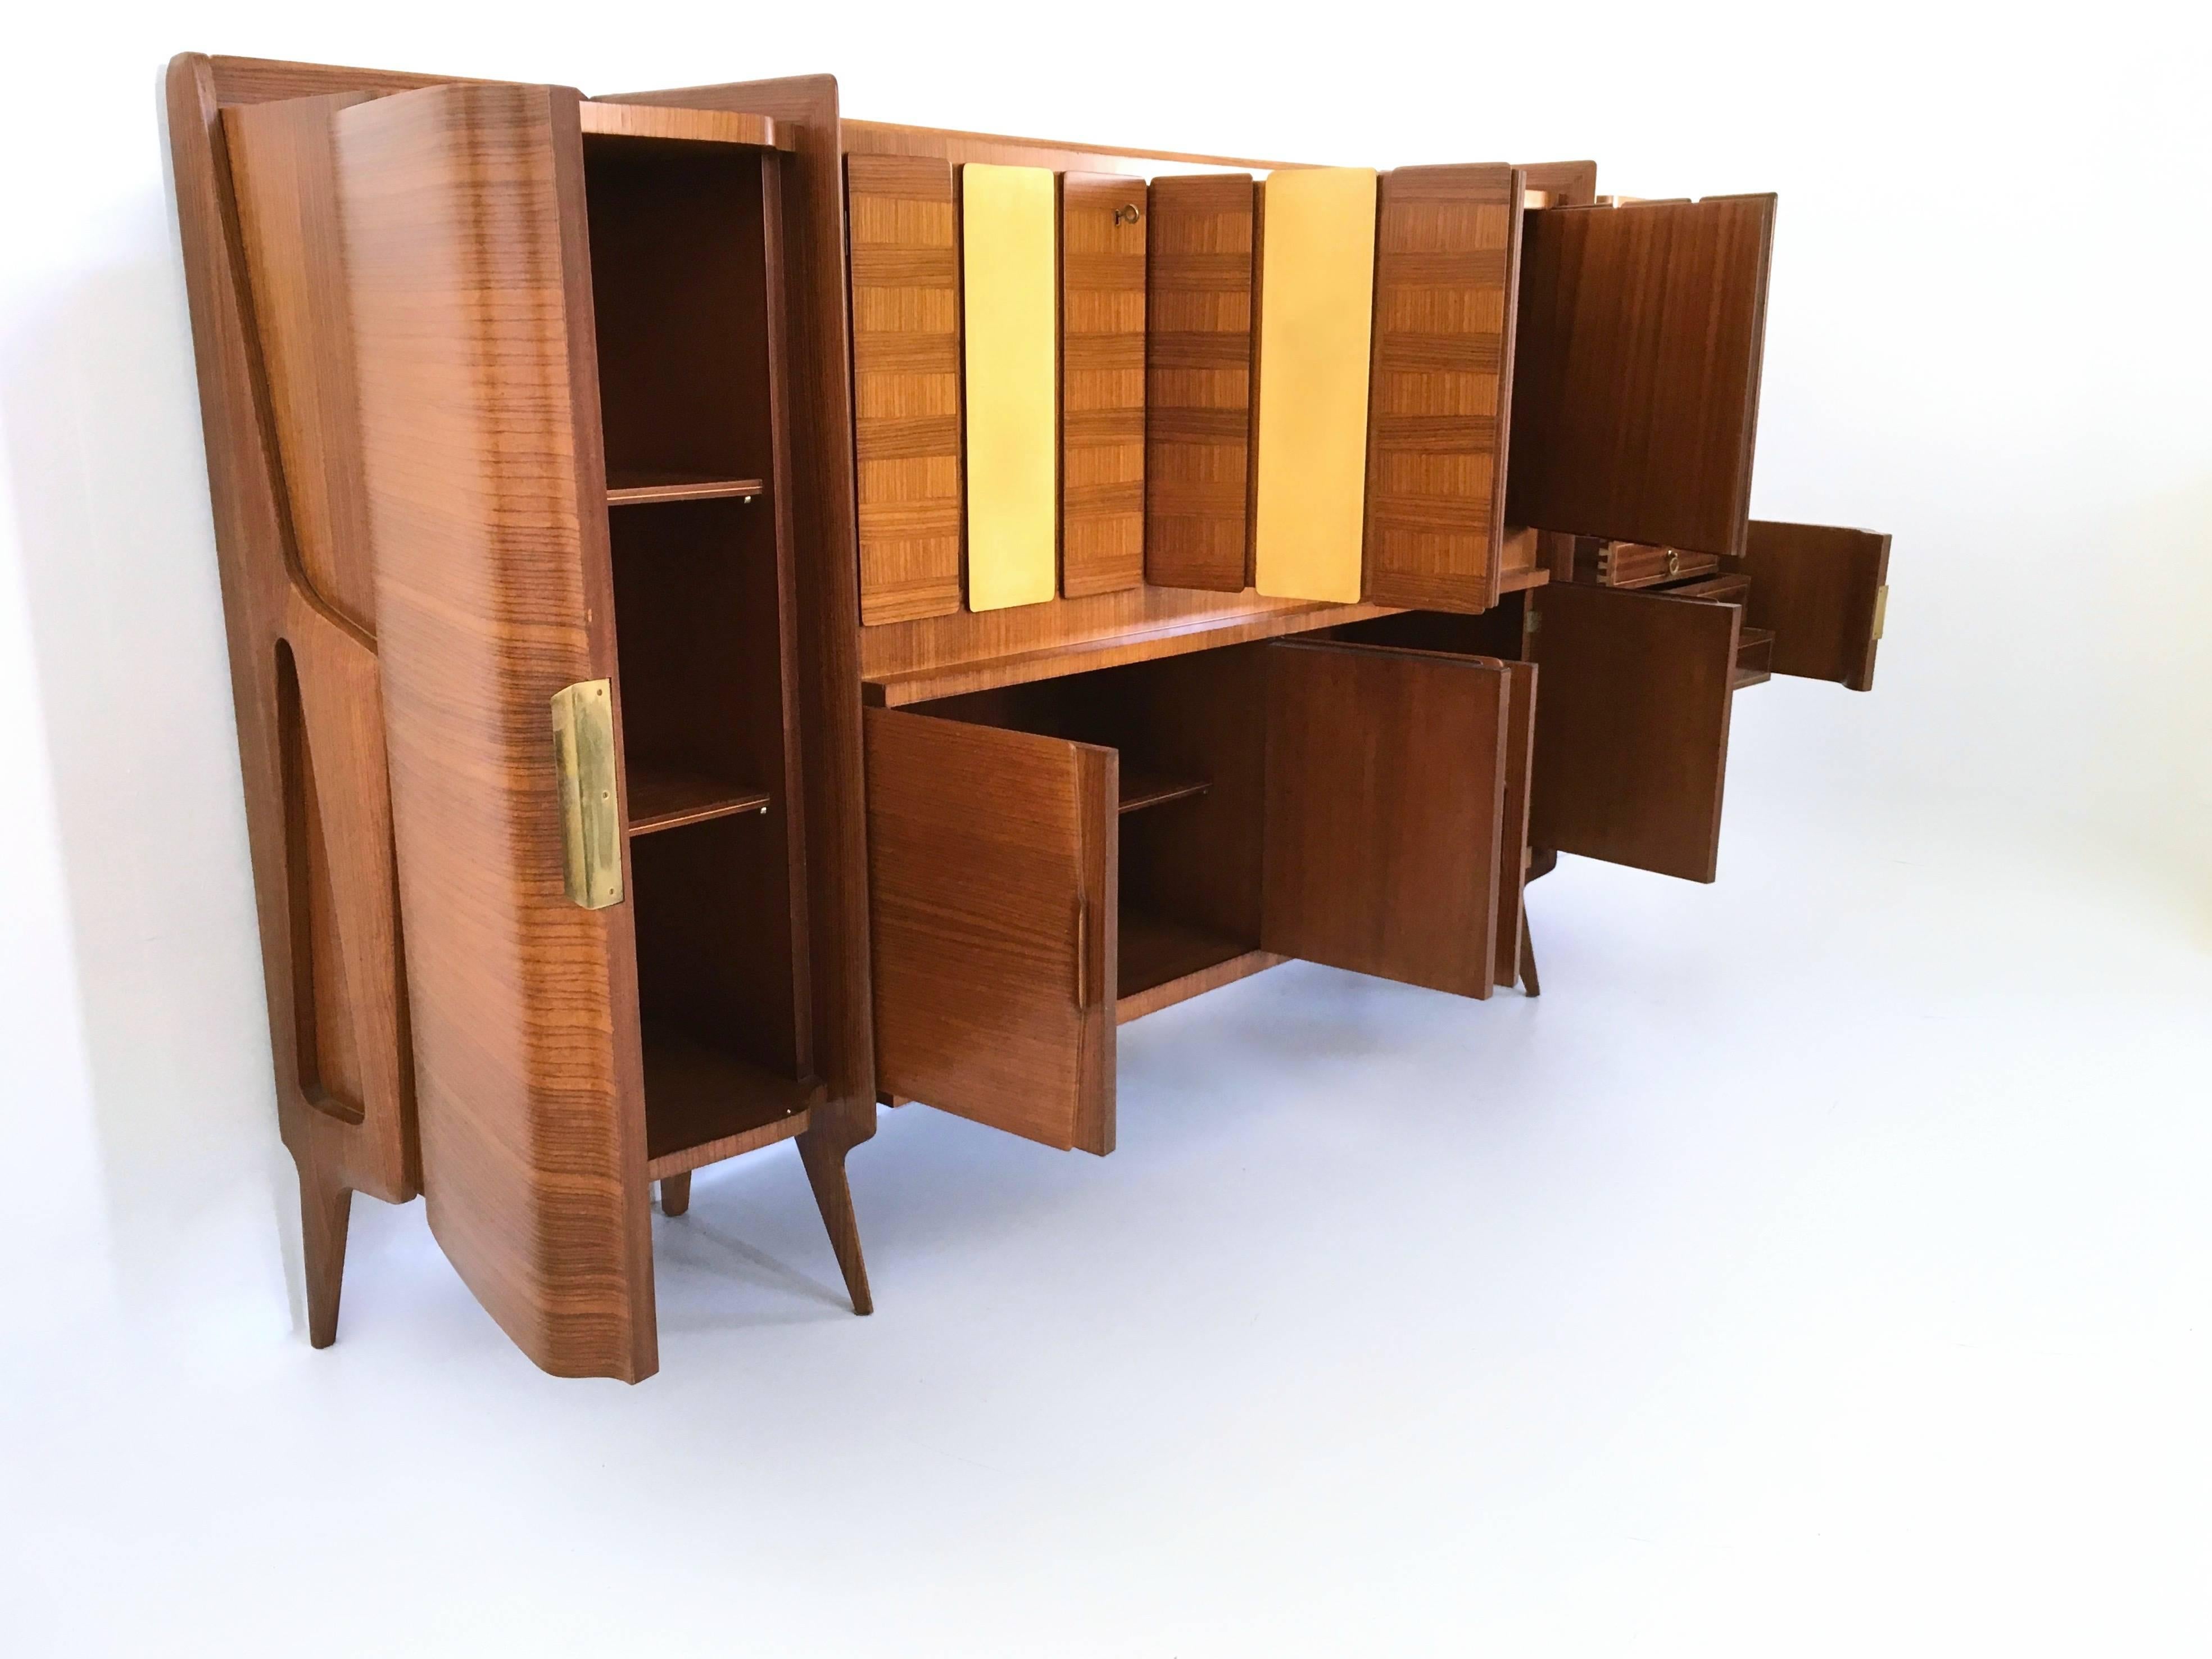 Italian Monumental Wooden Cabinet with Parchment Panels by Gio Ponti, Italy For Sale